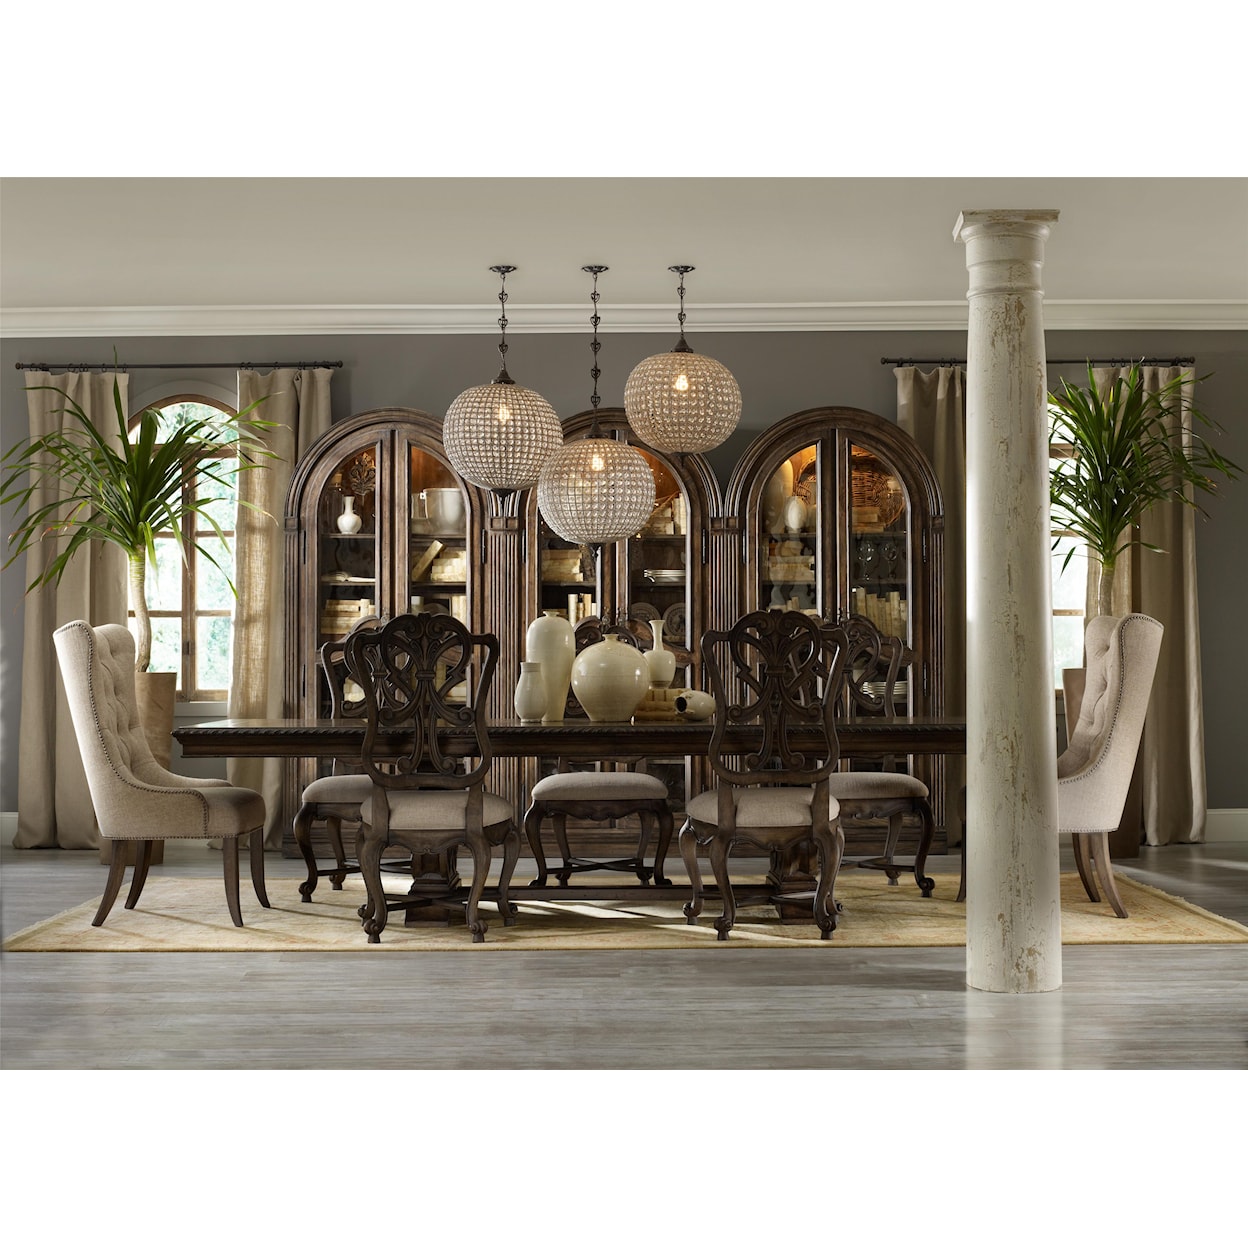 Hooker Furniture Rhapsody Dining Group Set with 2 Tufted Chair